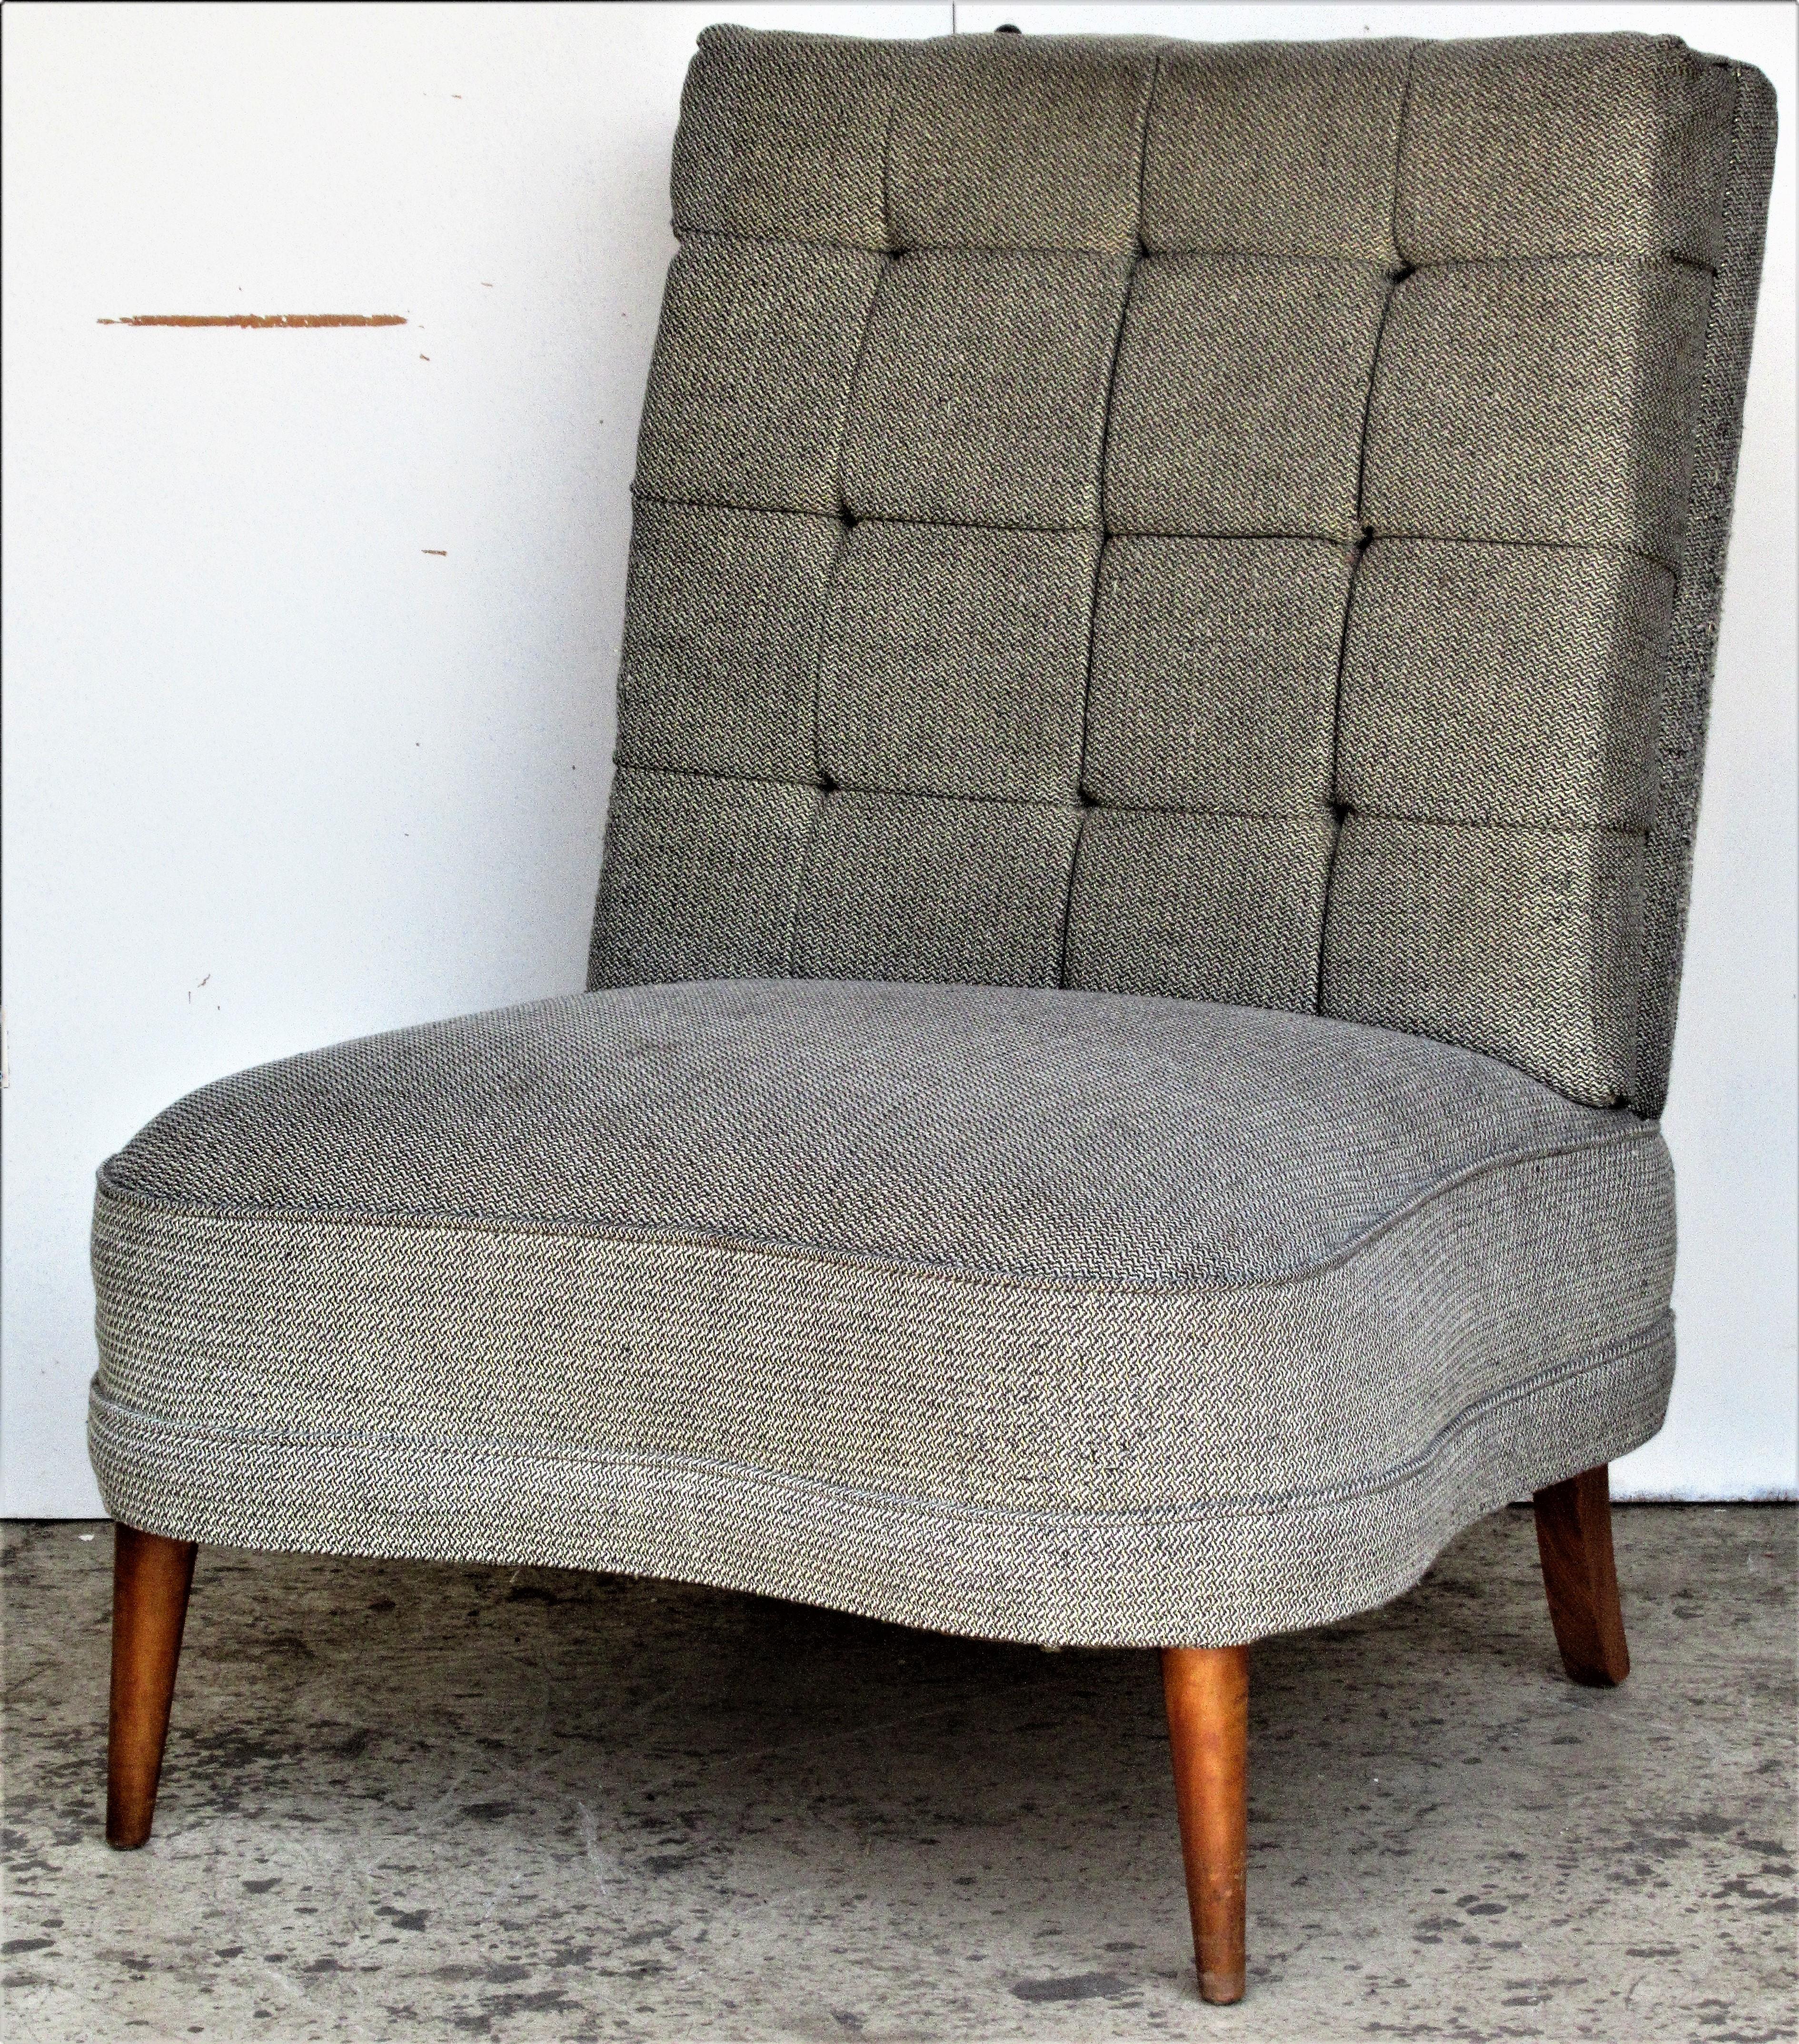 A substantial size tufted back curved seat slipper lounge chair raised on four tapered wooden legs in the original metallic thread upholstery. In the Hollywood Regency style of William Billy Haines, circa 1940-1950.